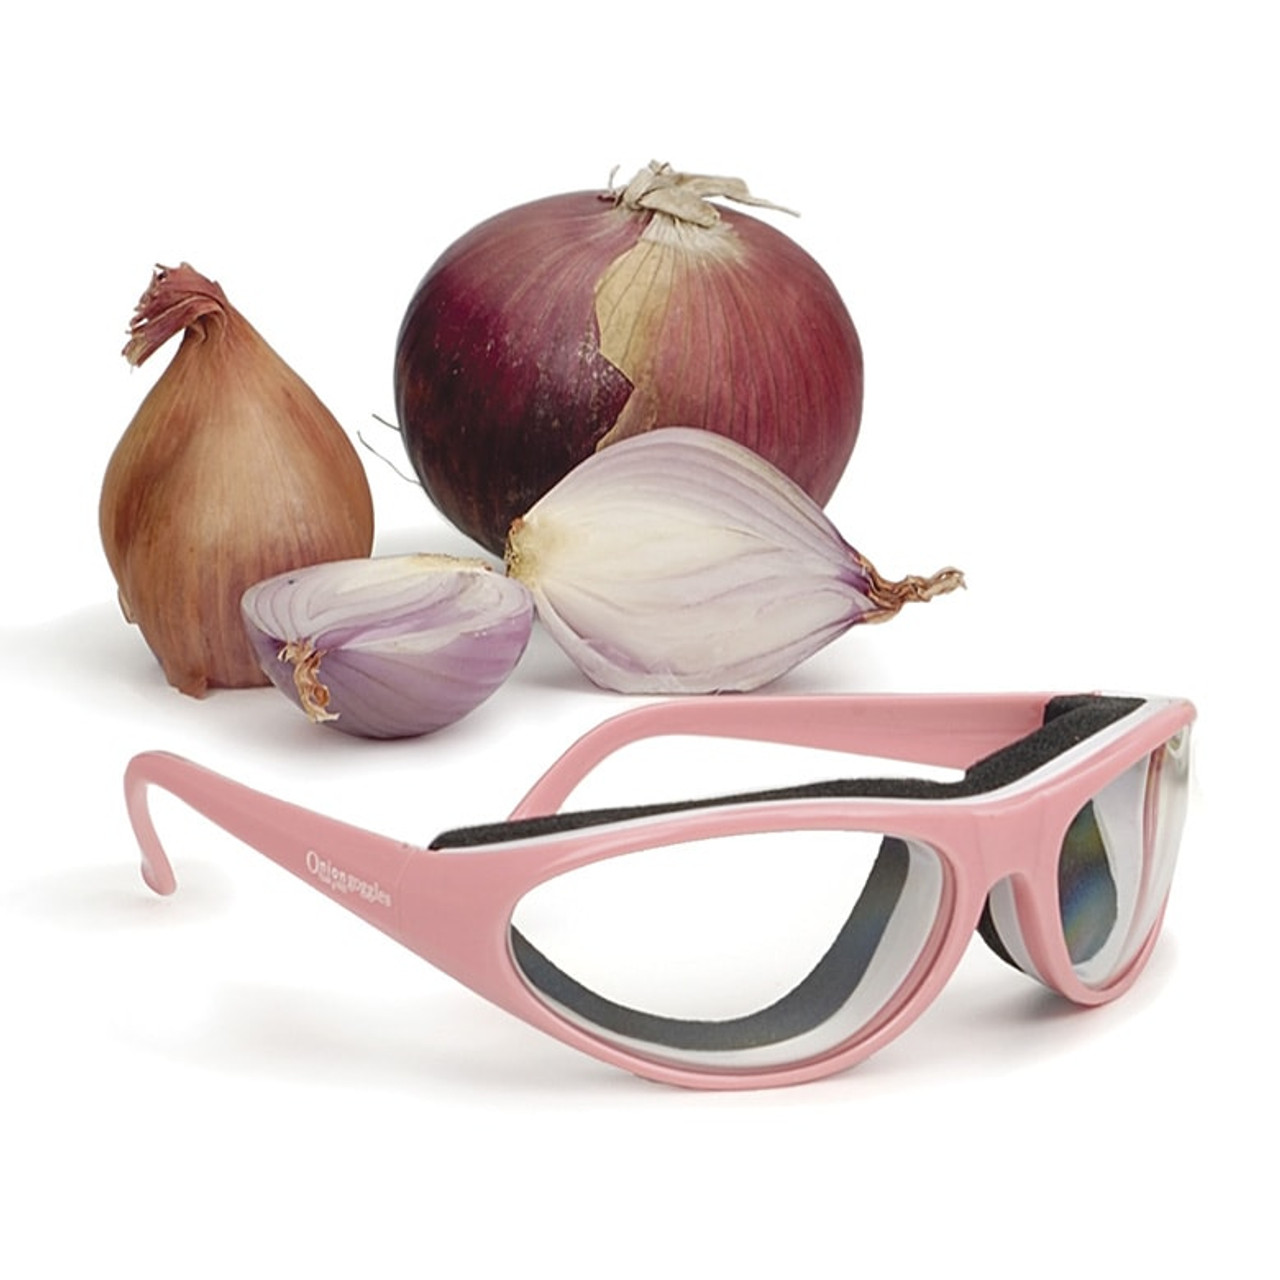 https://cdn11.bigcommerce.com/s-hccytny0od/images/stencil/1280x1280/products/1354/4281/rsvp-onion-goggles-pink-2__88210.1594545029.jpg?c=2?imbypass=on